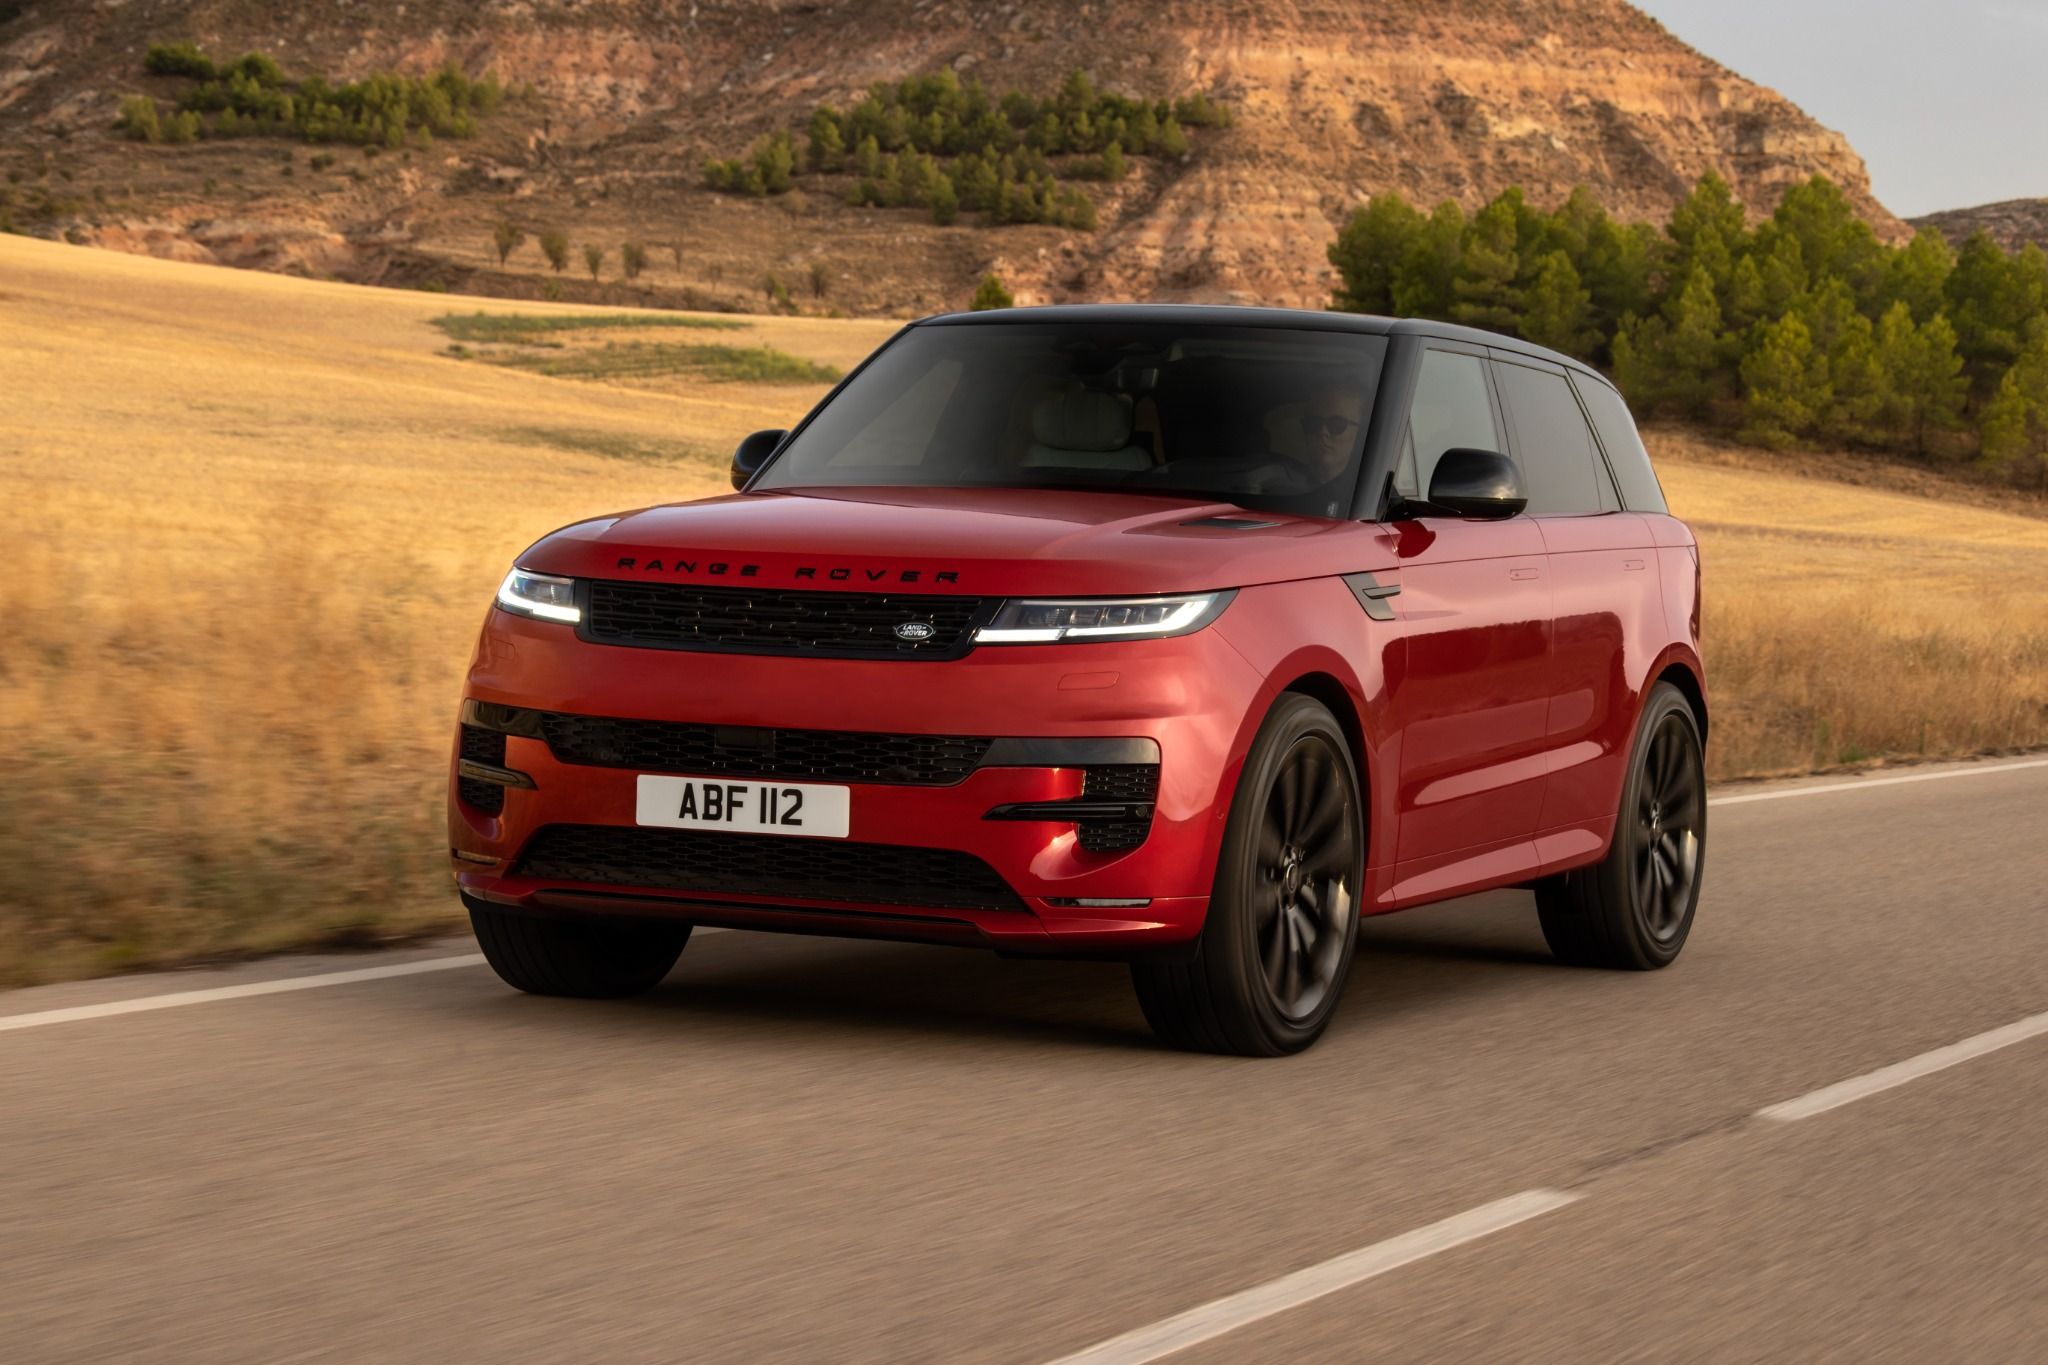 What Range Rover models are available?